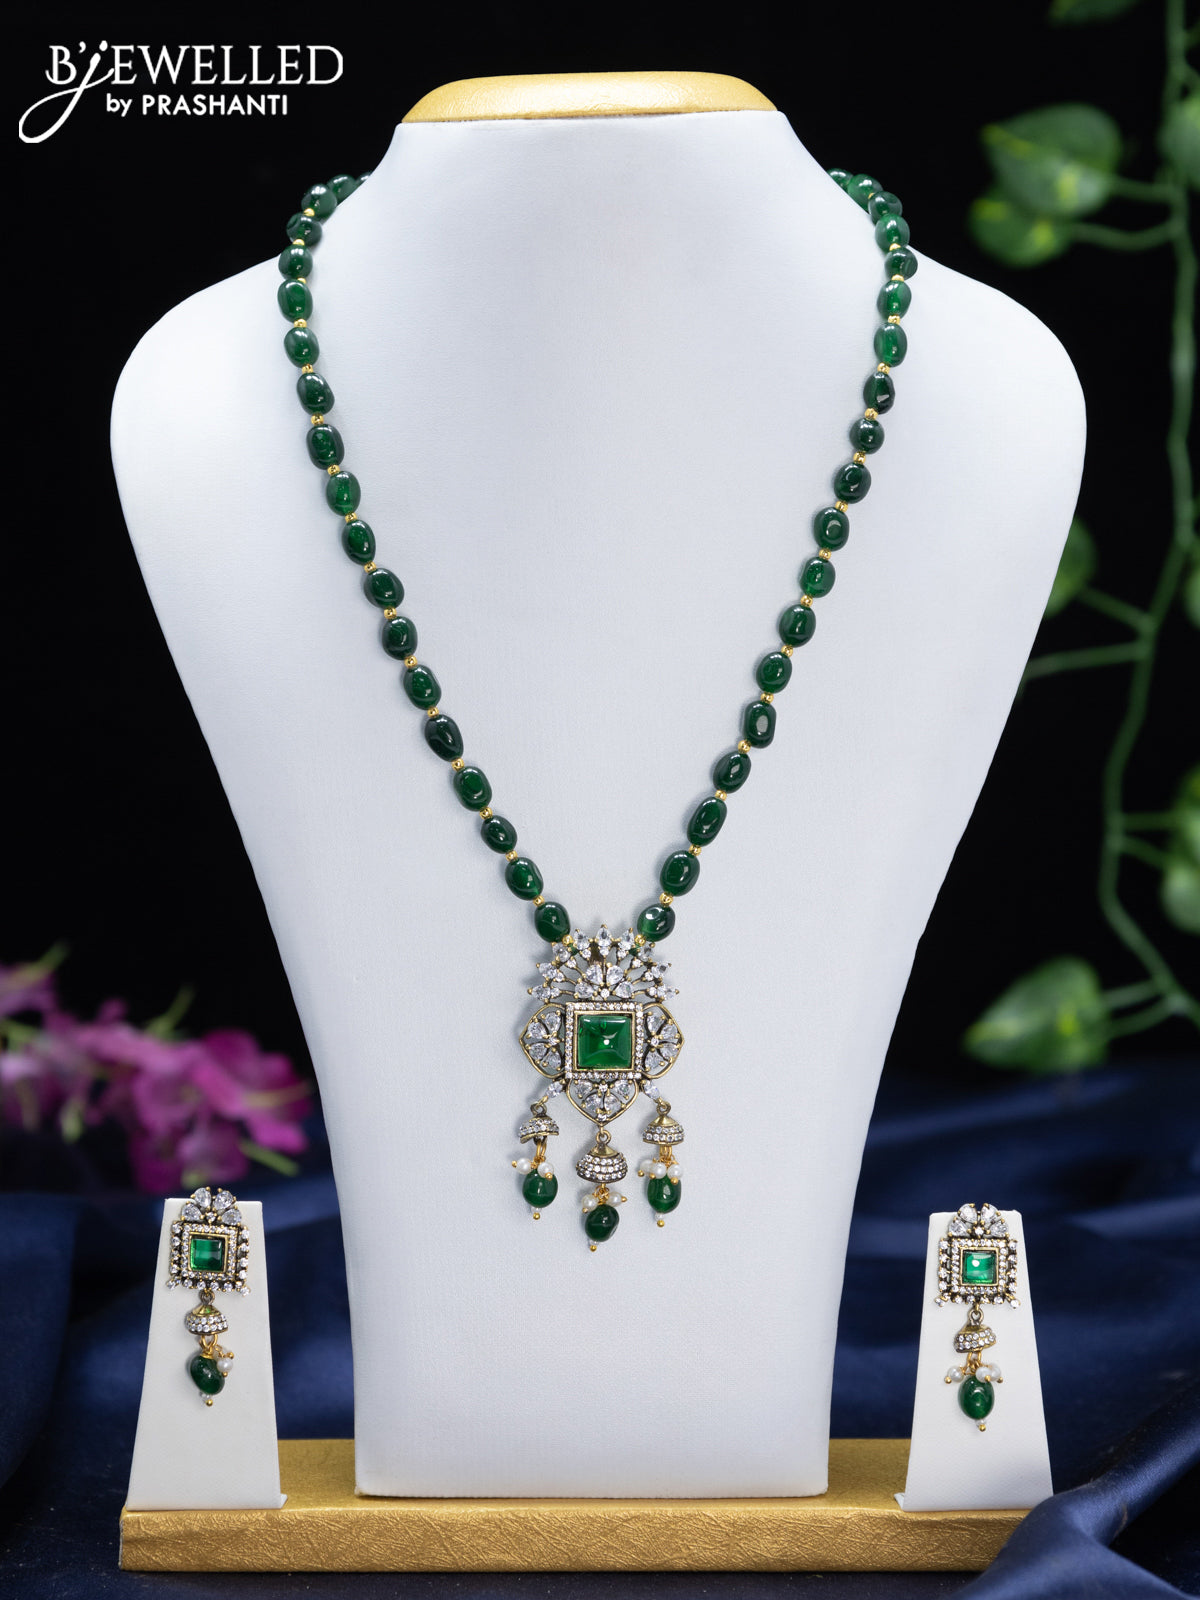 Beaded green necklace with emerald & cz stones and pearl hangings in victorian finish